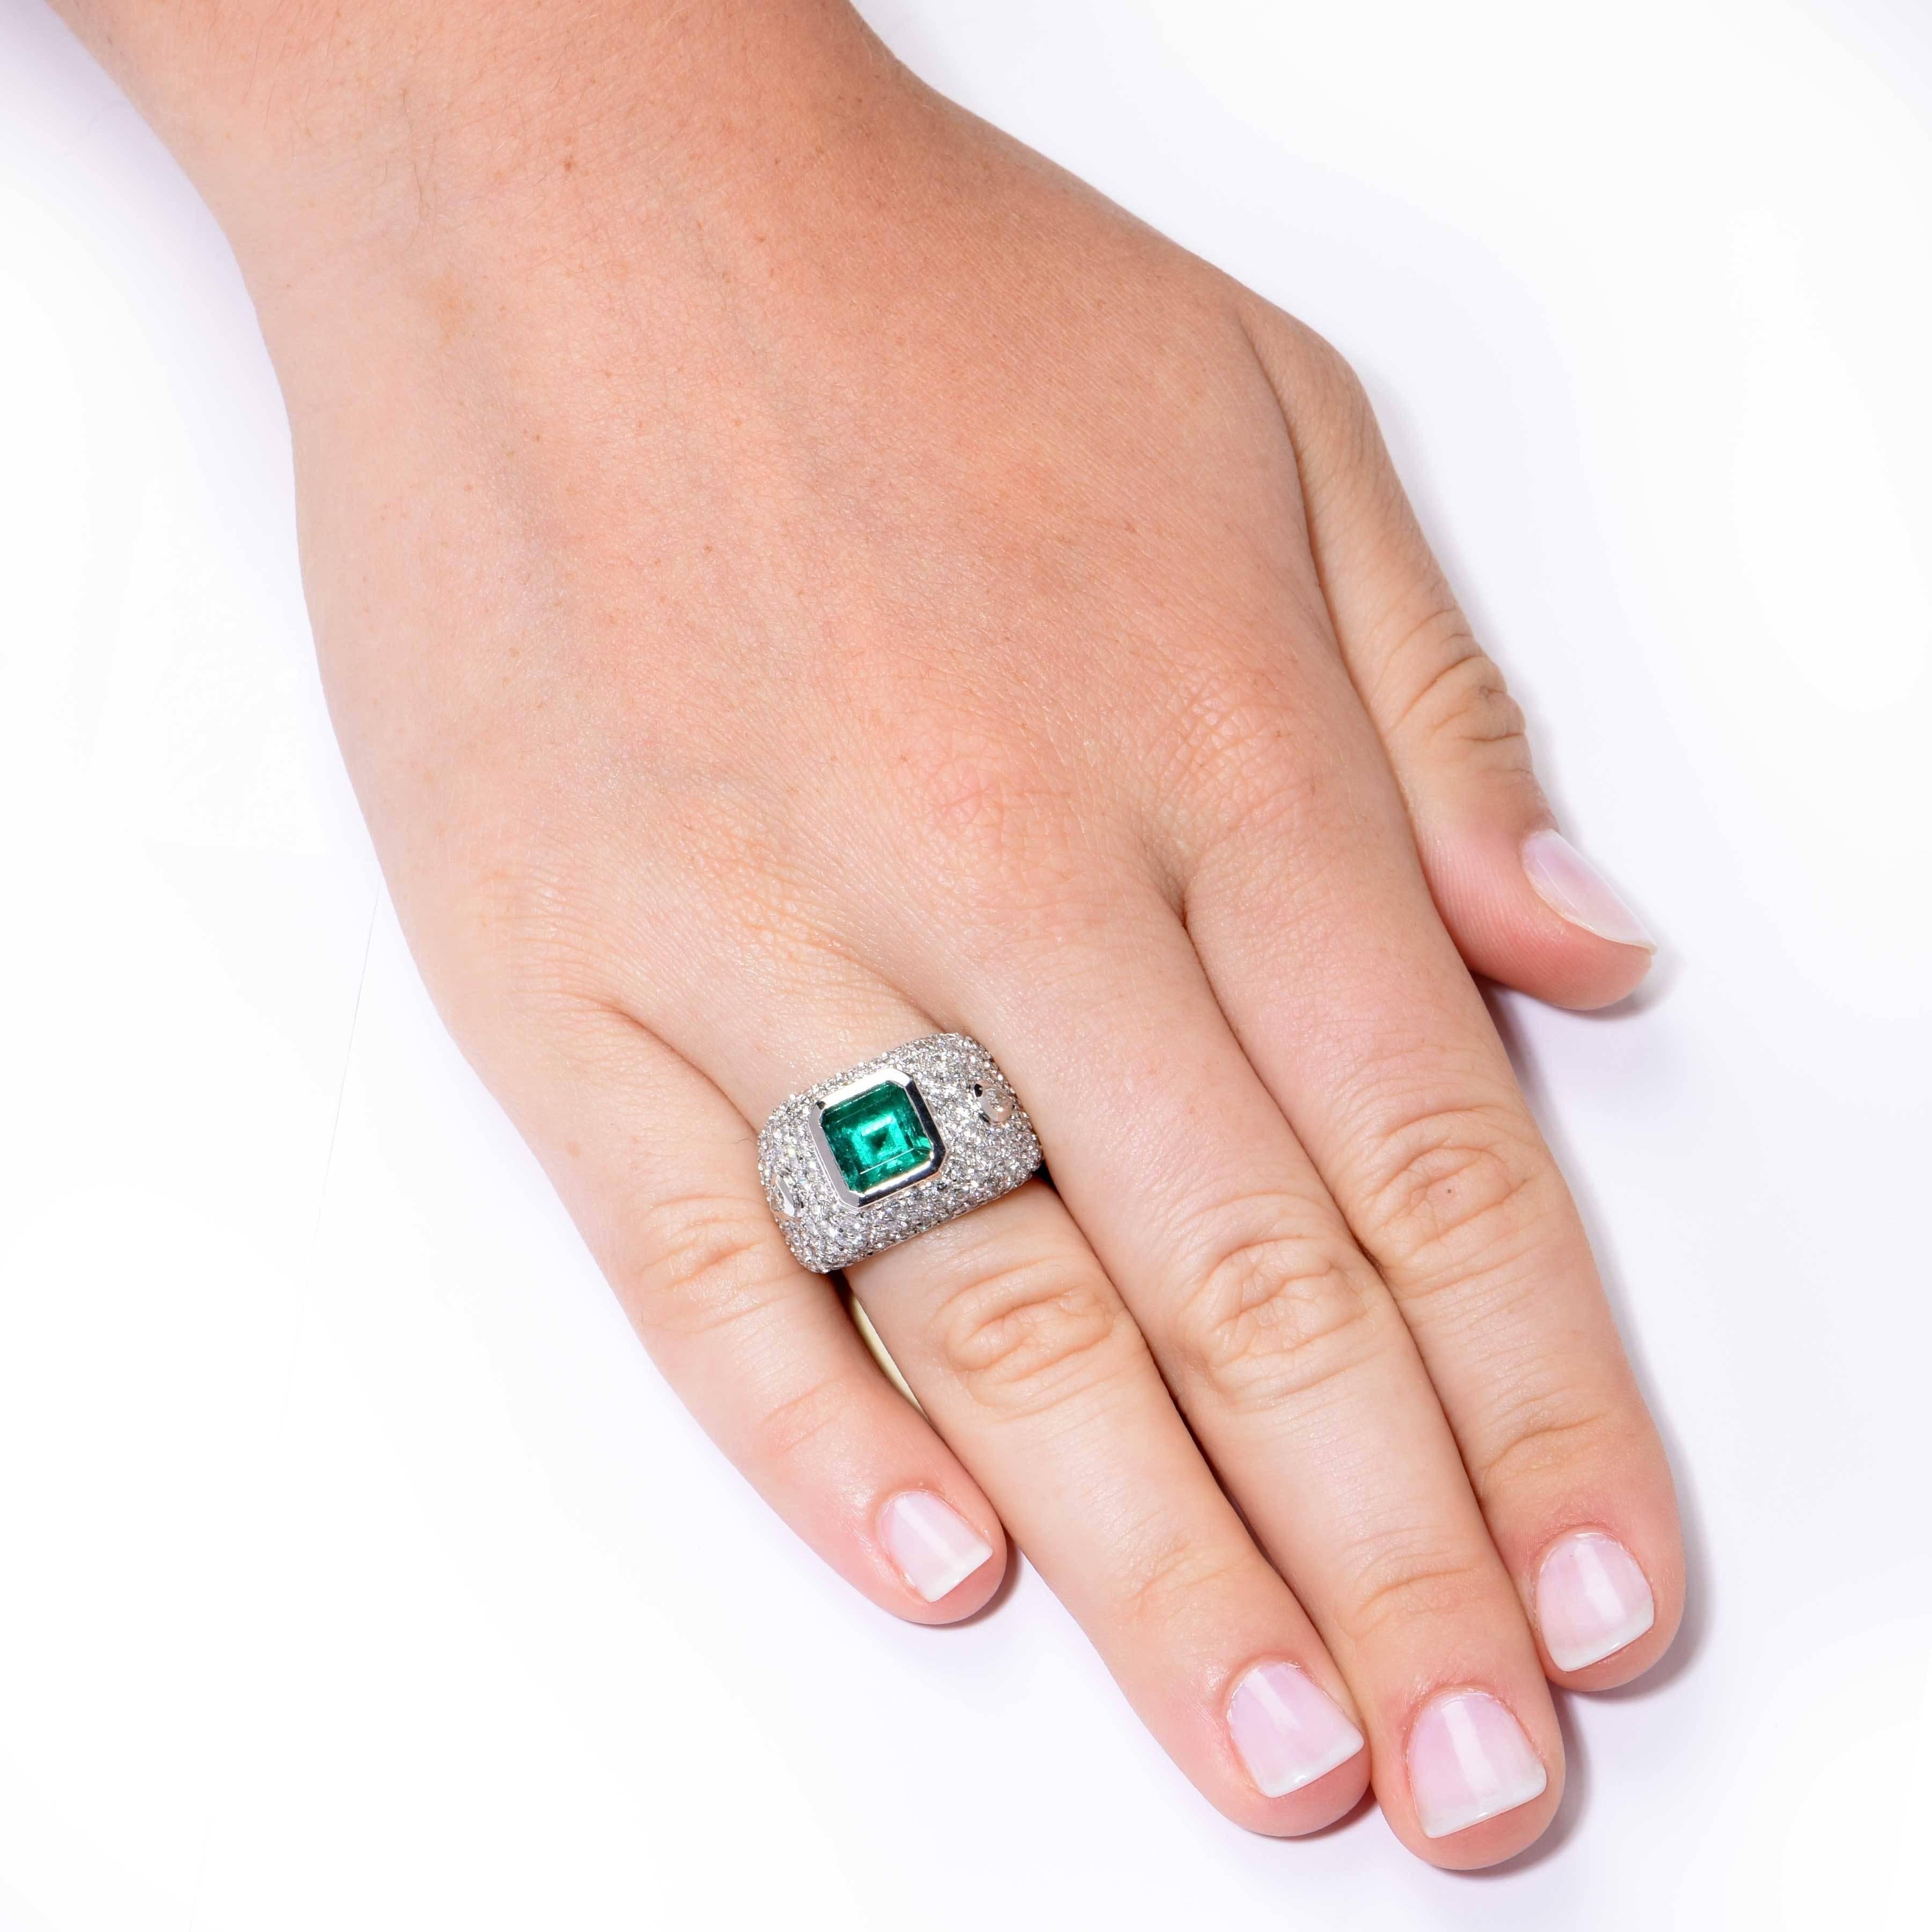 This beautiful emerald and diamond ring features a 3.10 Carat Natural Emerald surrounded by approximately 4.10cts of round brilliant cut diamonds set in 18 Karat White Gold.

Ring Size: 7 1/4 (can be sized)
Metal: 18 Kt White Gold (stamped and/or